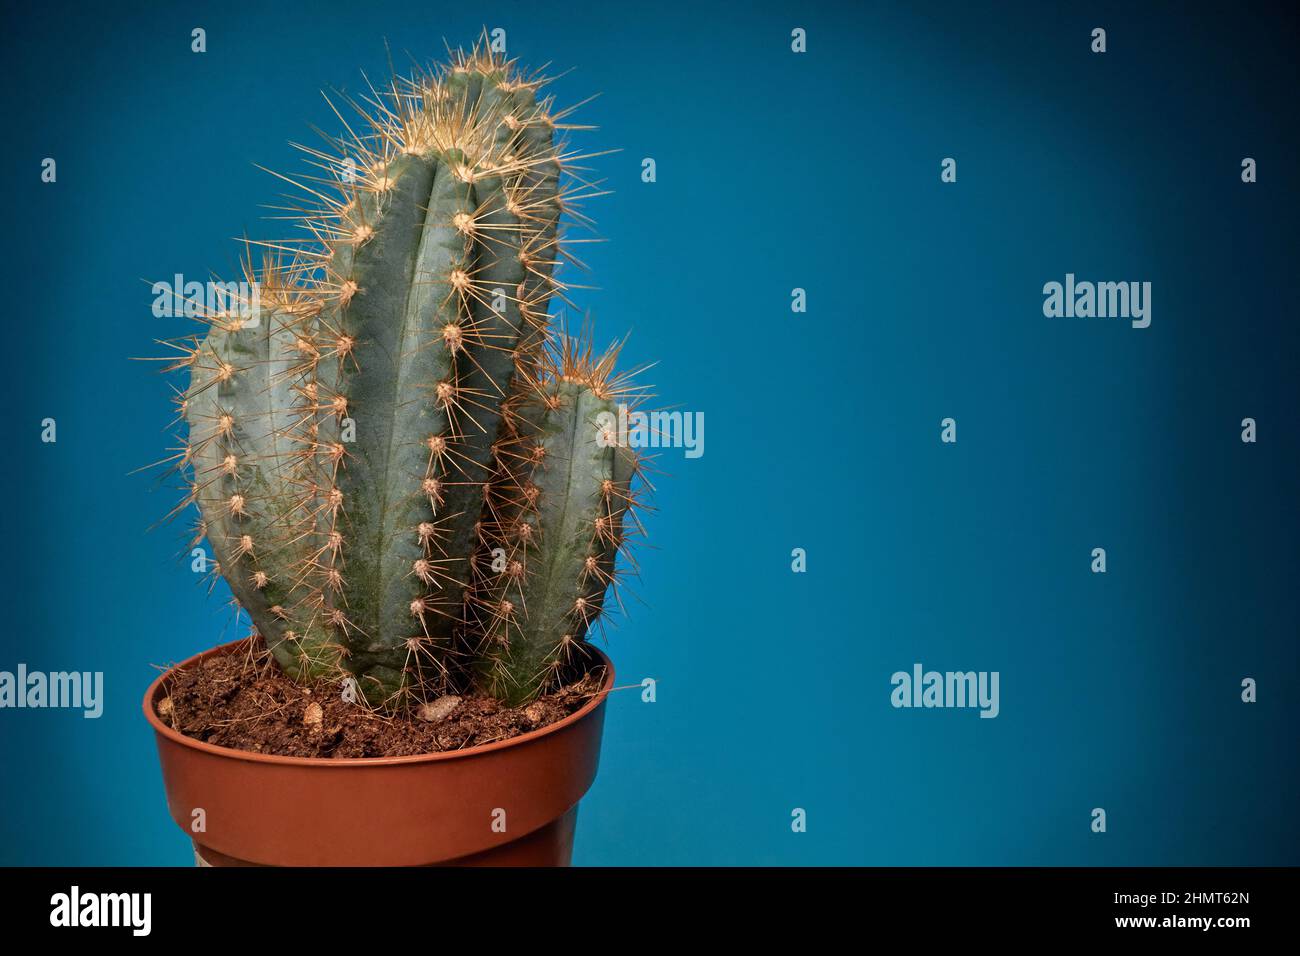 potted green cactus with  spines. Stock Photo